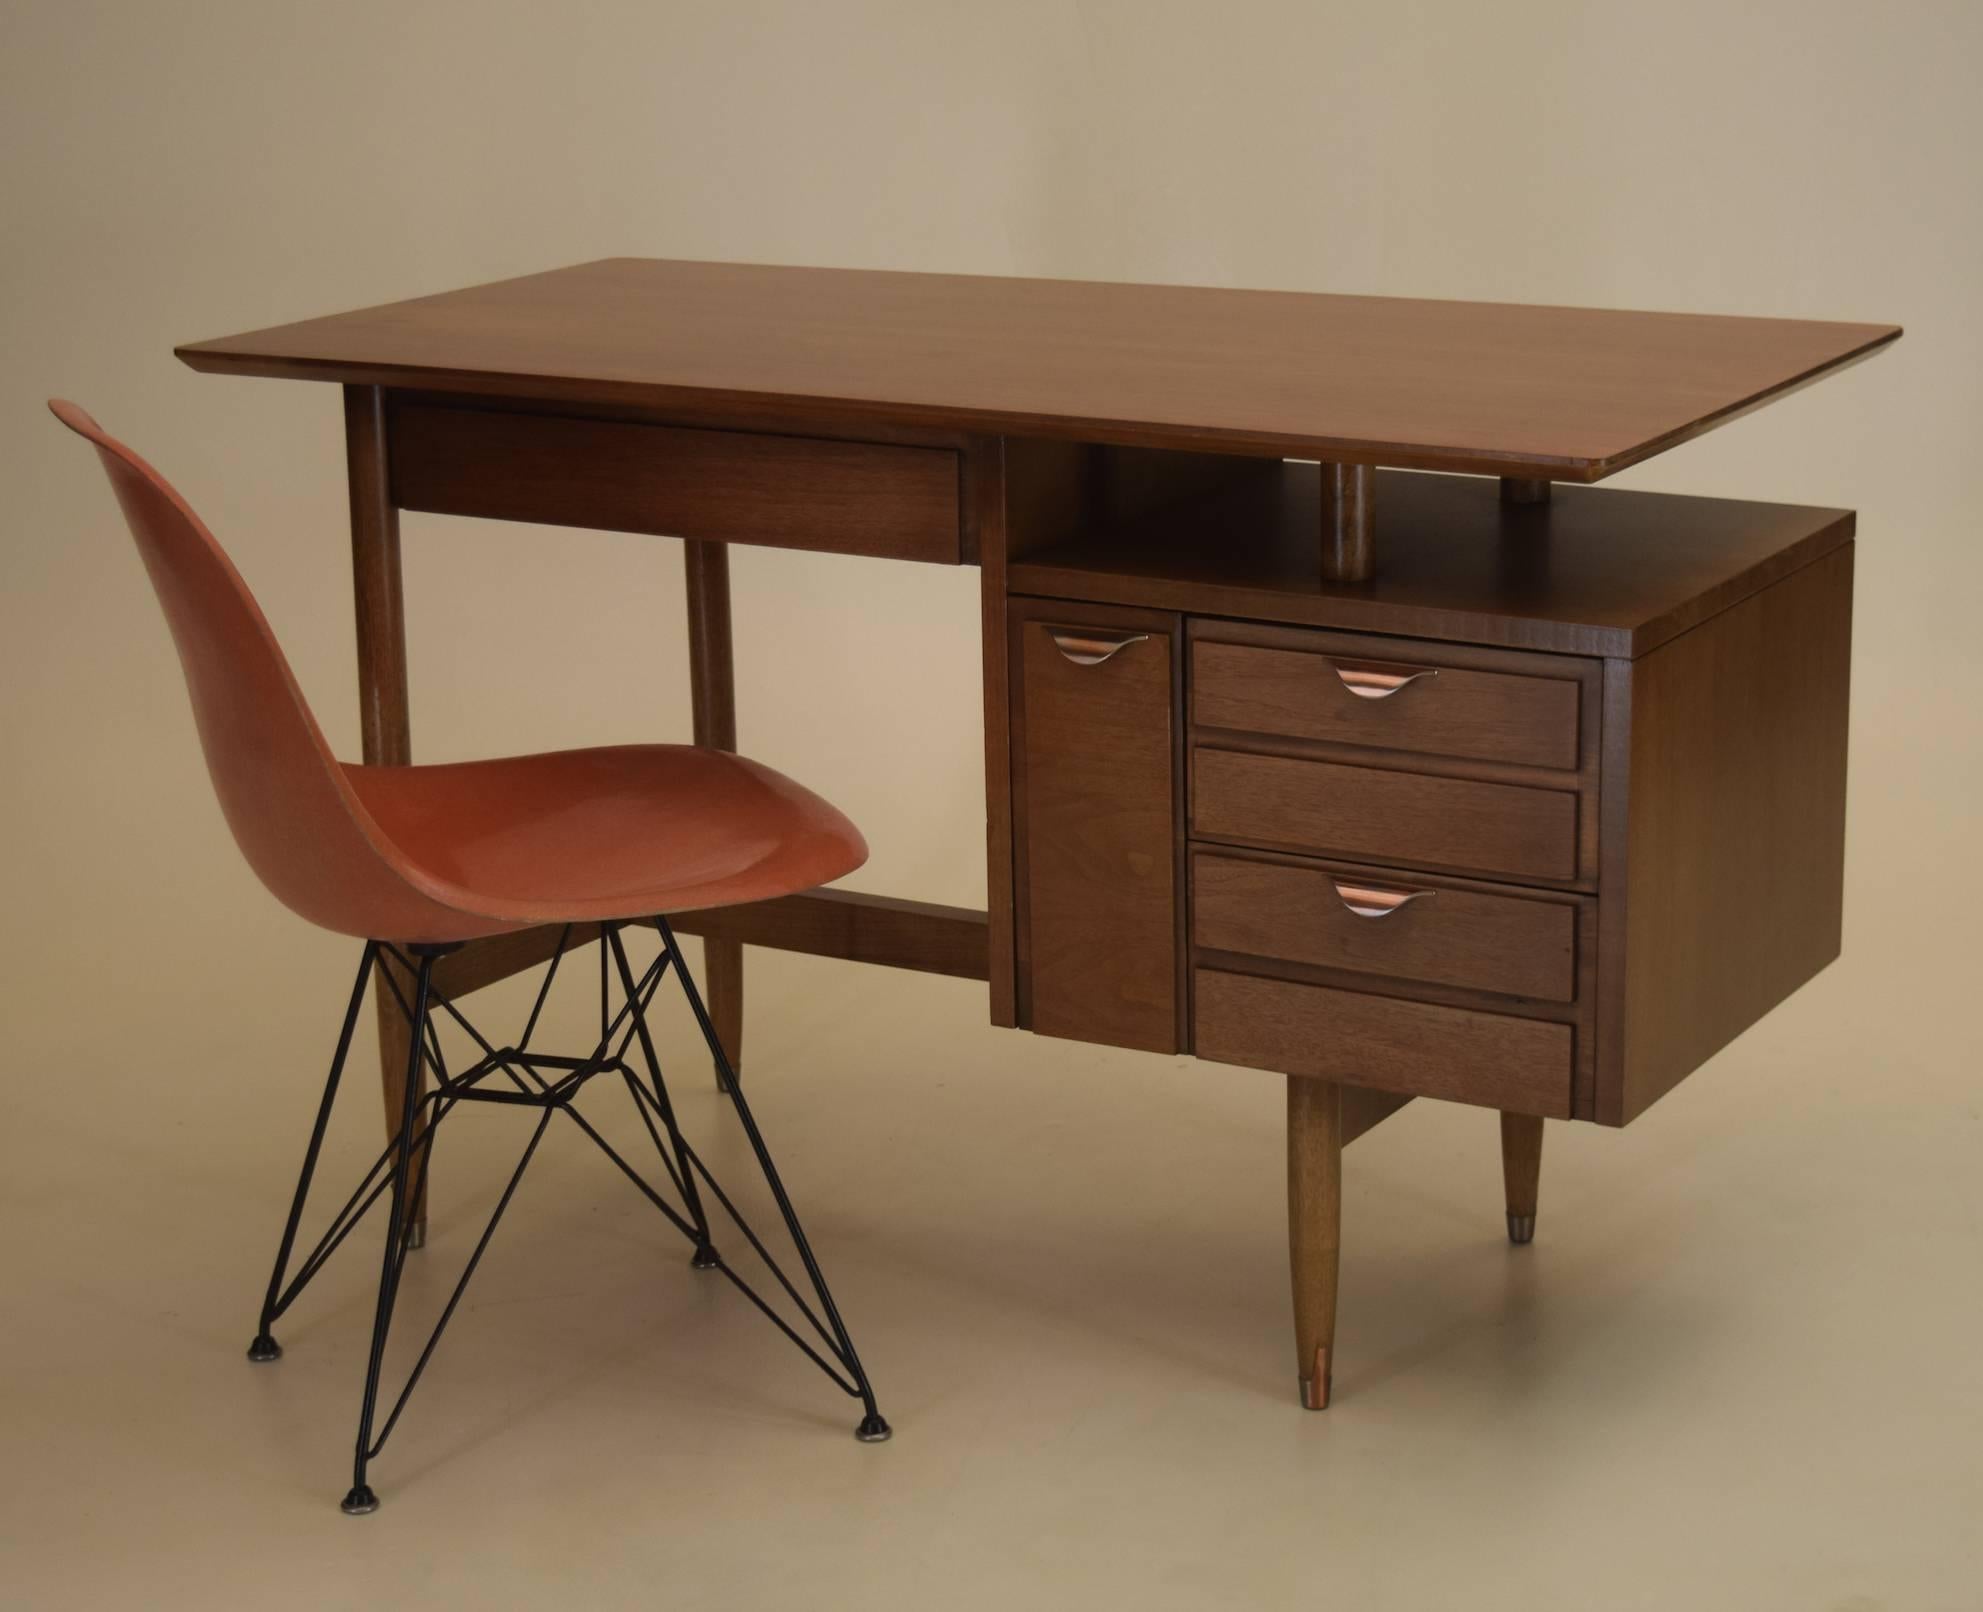 This brilliant table is ideal for the home office or study at only 4 feet wide and a modest depth of 2 feet. An excellent non-imposing size that is finished on the front and back with attention to detail clearly visible.

There are four drawers,